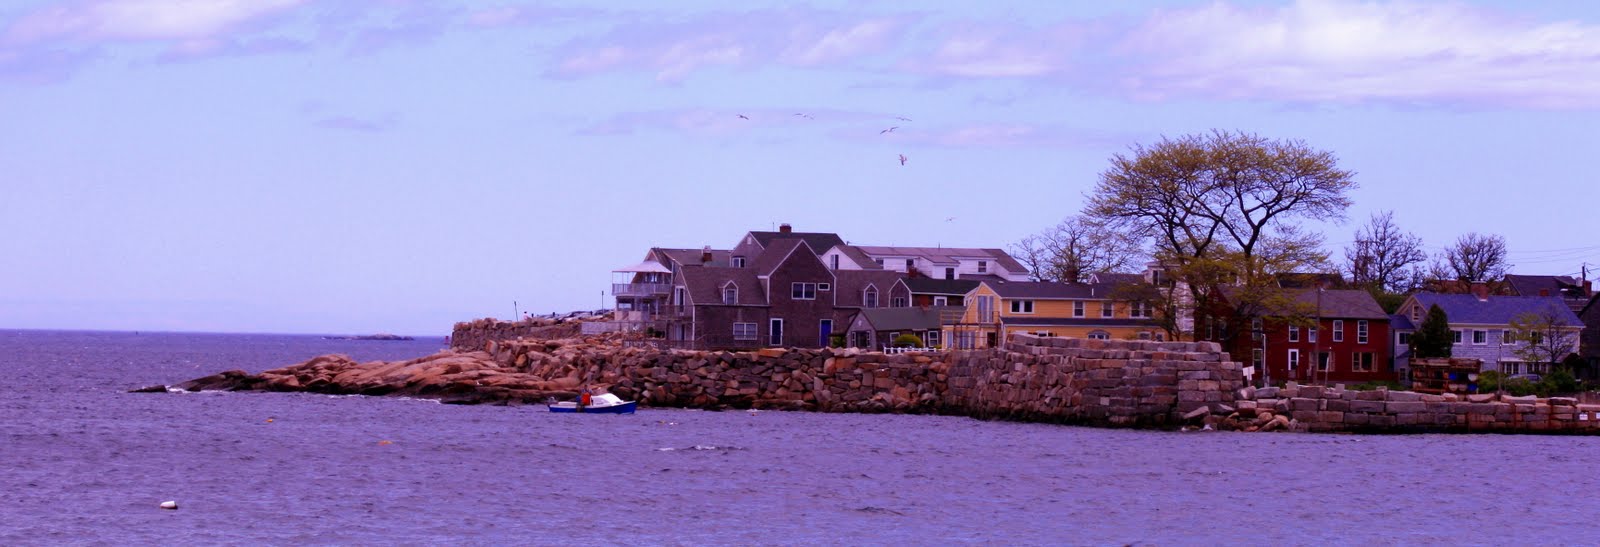 Here are some pics that I took on Cape Ann this weekend